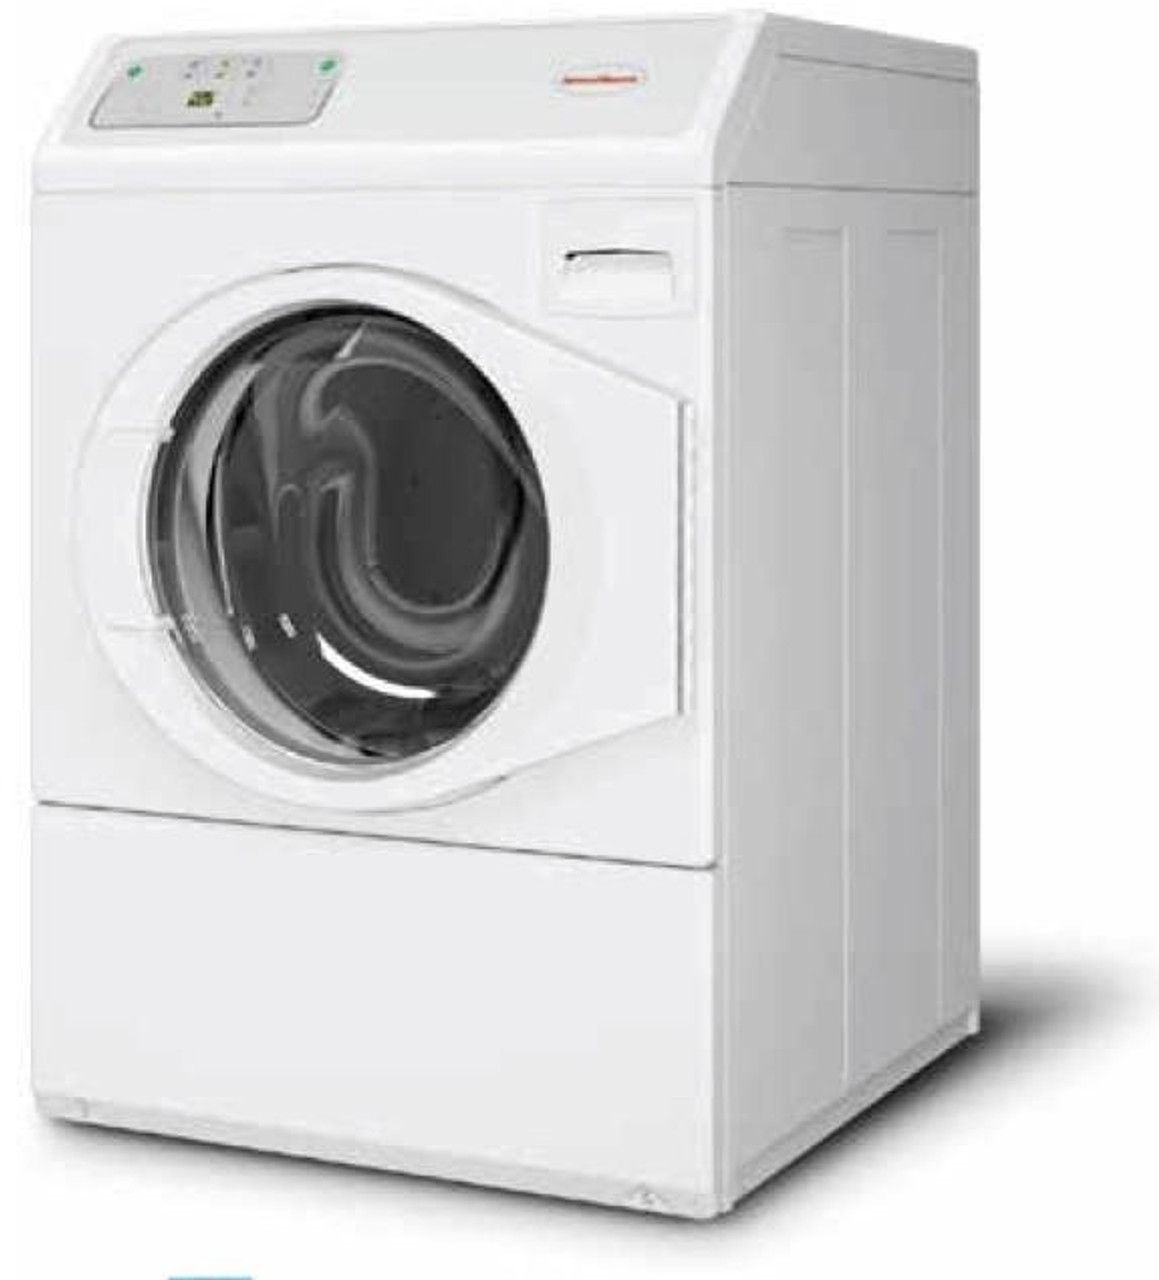 Speed Queen TR3003WN 26 Inch Top Load Washer with 3.2 cu. ft. Capacity, 4  Preset Cycles, Extra Rinse Option, Auto Fill System, Stainless Steel Tub]  and 840 RPM